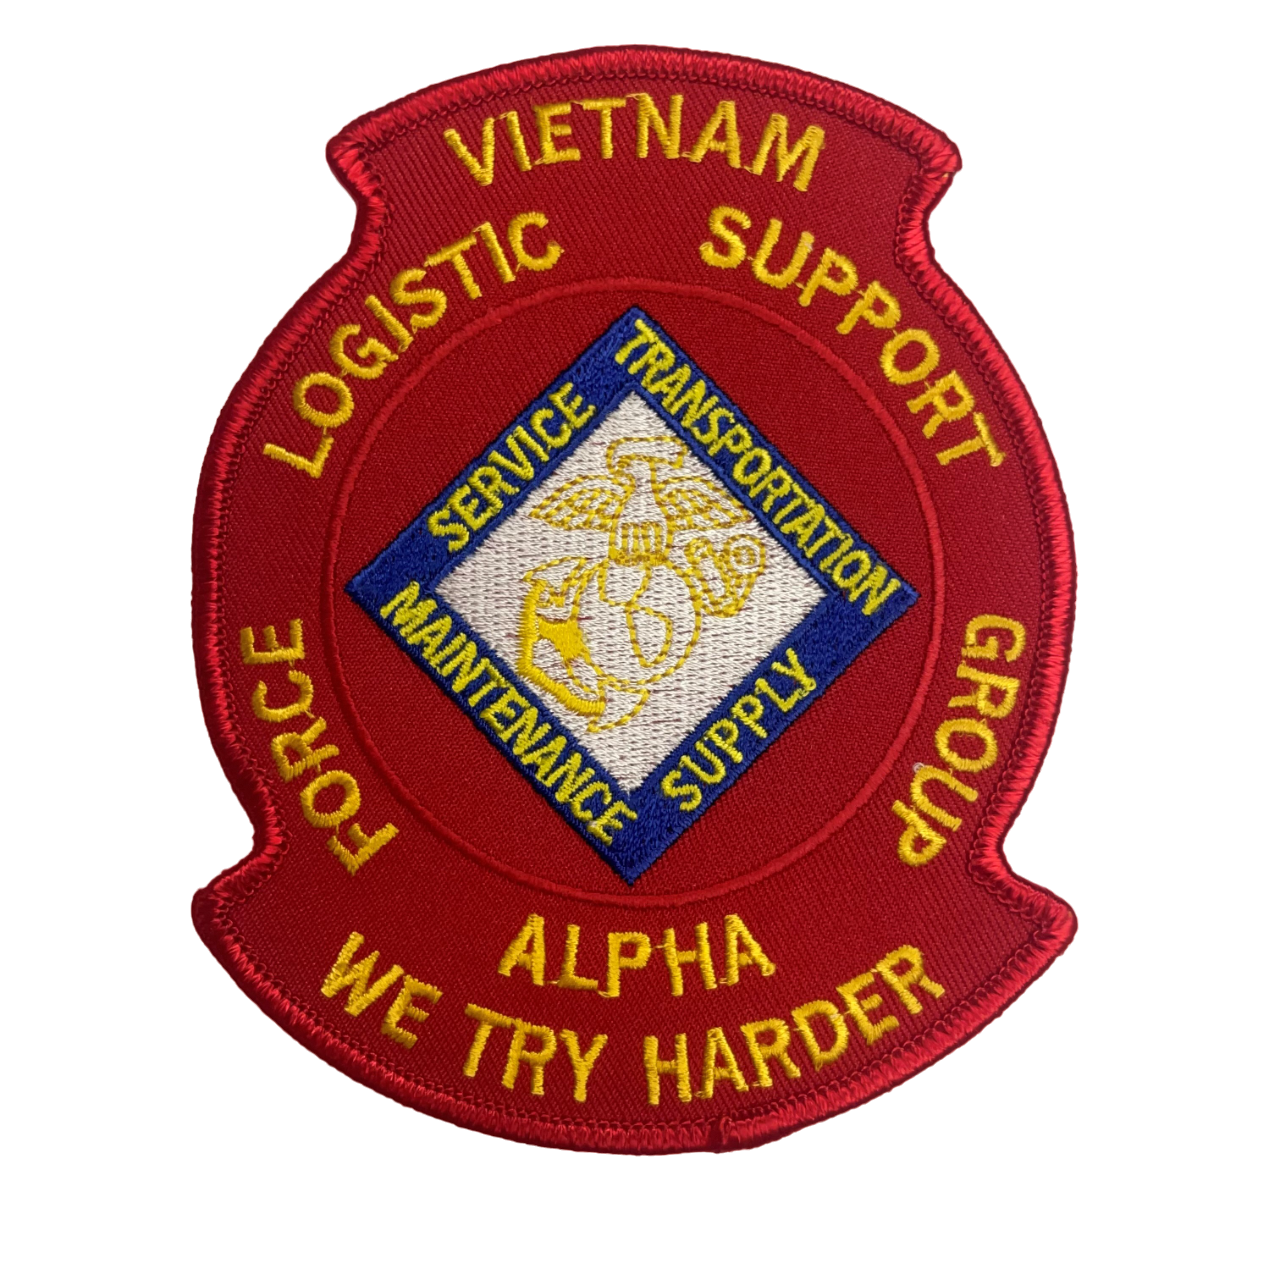 USMC Force Logistics Support Group - Alpha - "We Try Harder" - Sew-On Patch